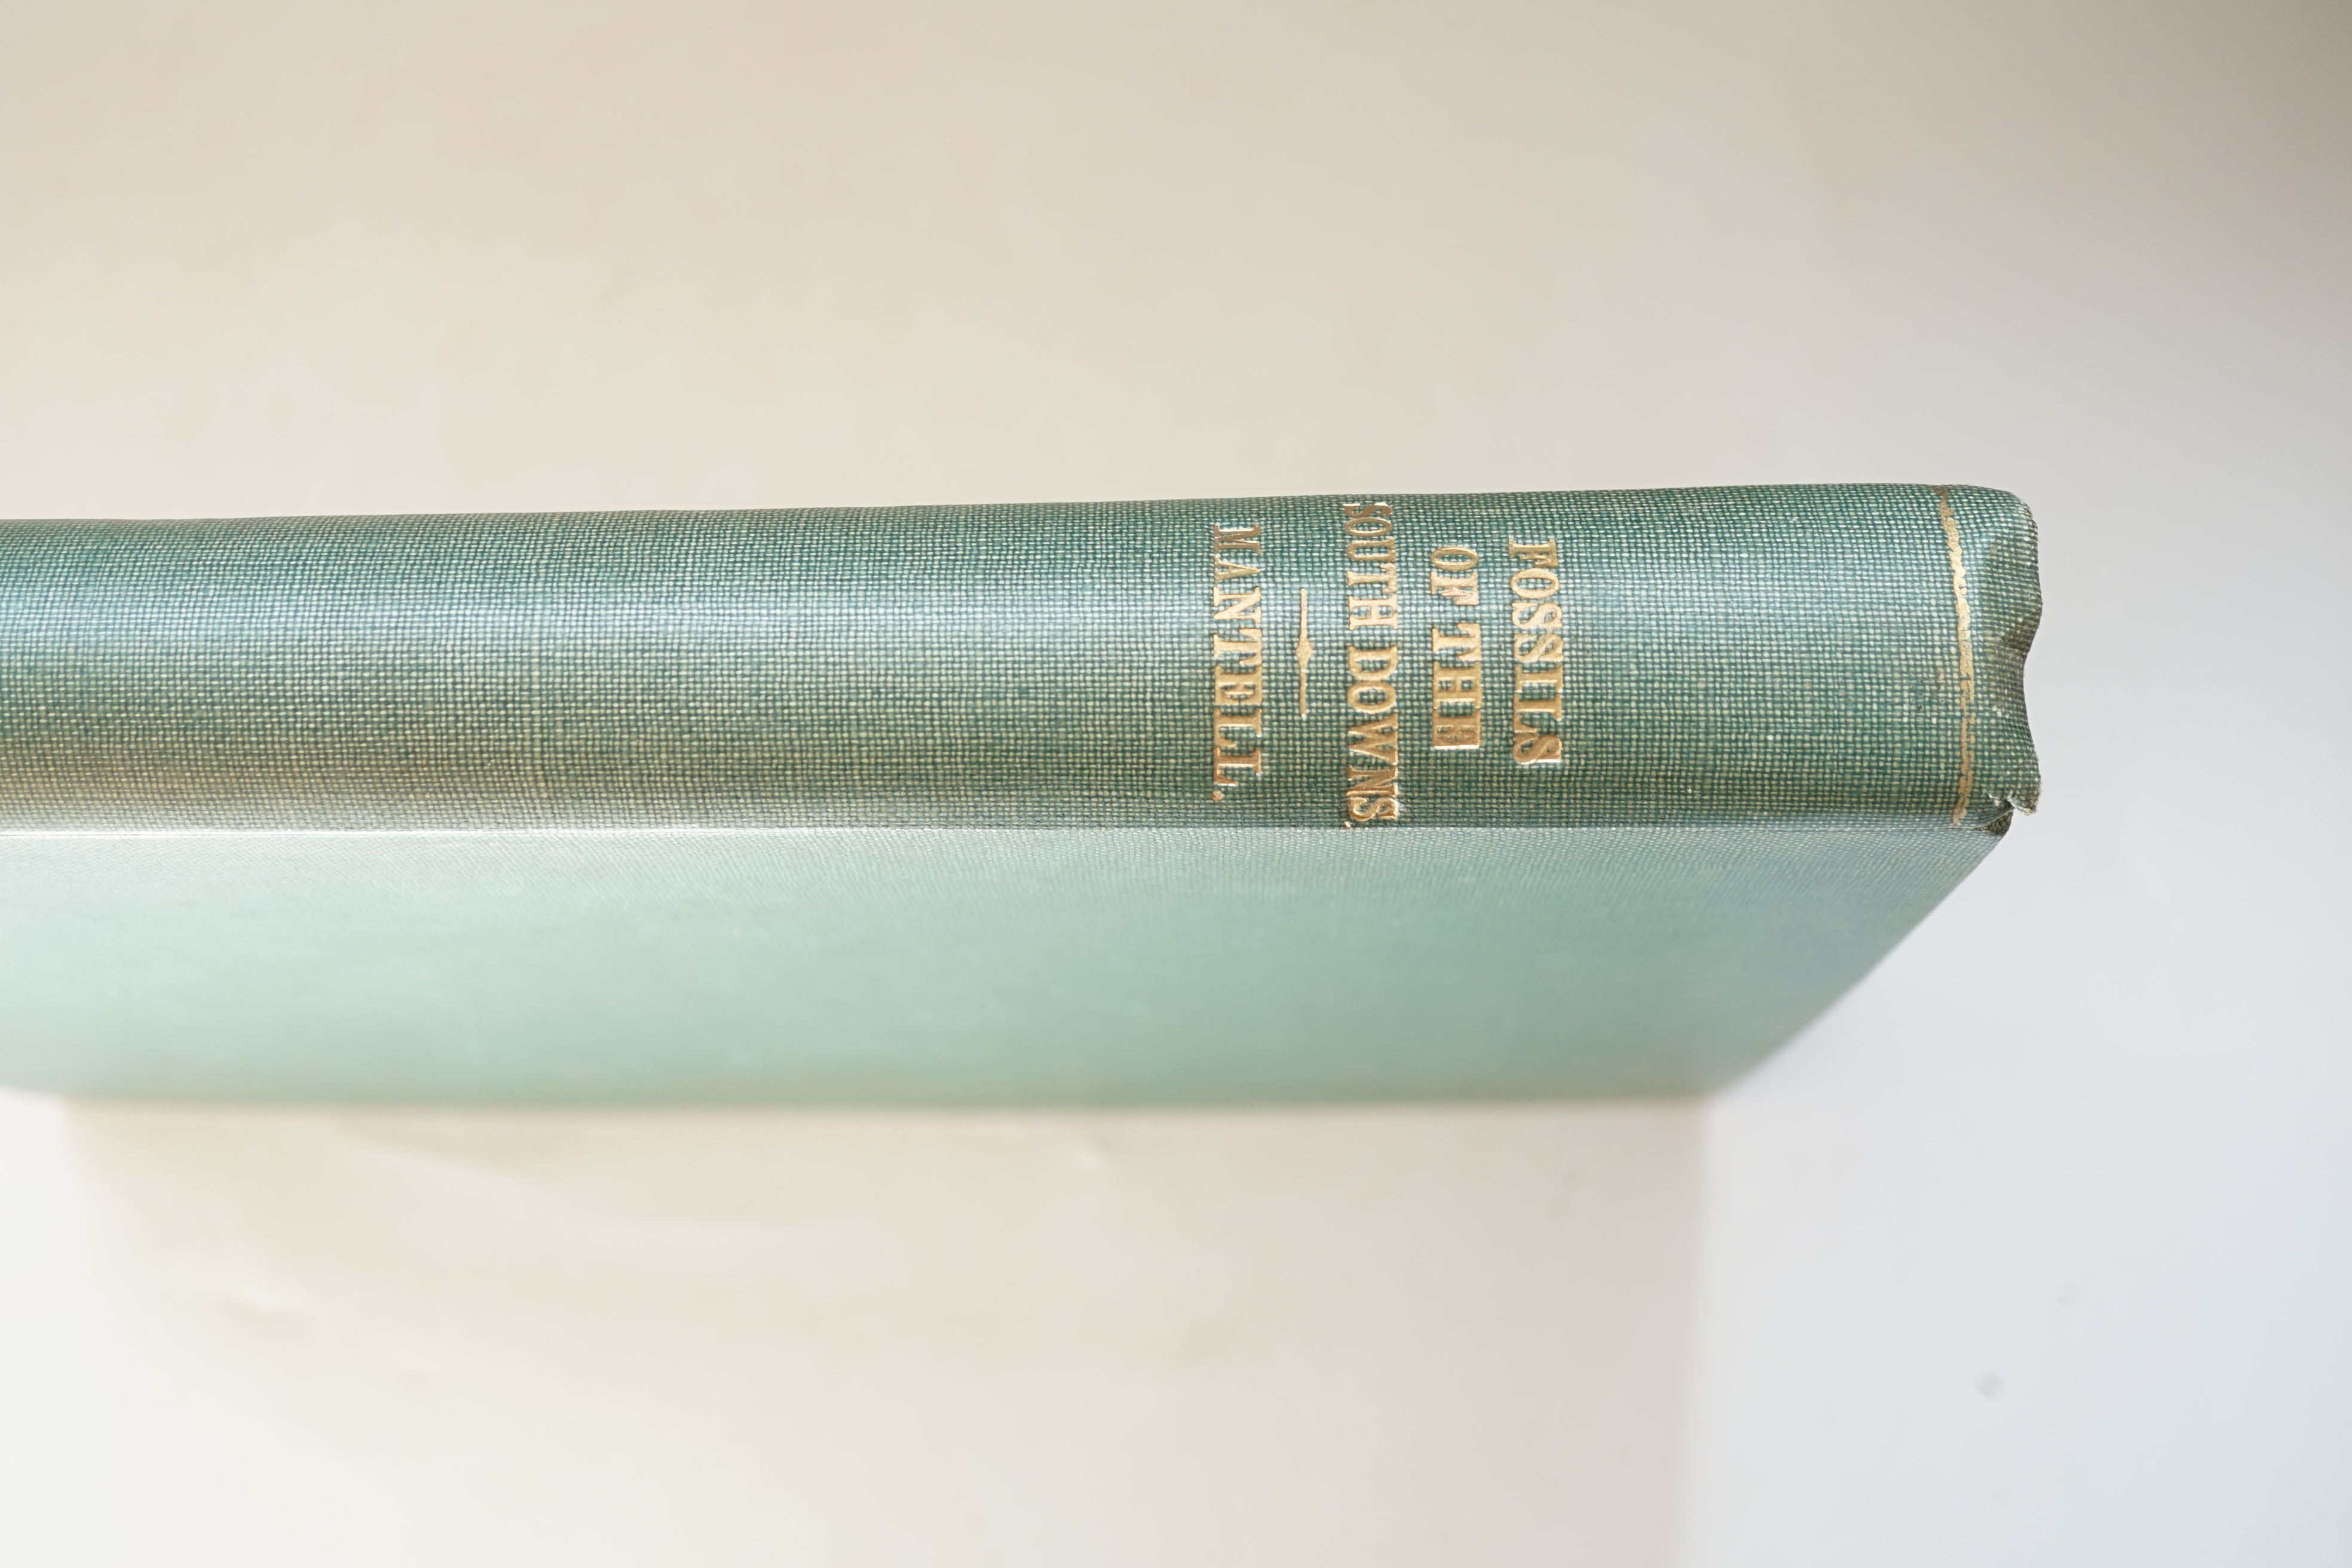 Mantell, Gideon - The Fossils of the South Downs; or, Illustrations of the Geology of Sussex, first edition, 4to, rebound green cloth, half title, 42 engraved plates (2 folding) including the hand-coloured map, index at